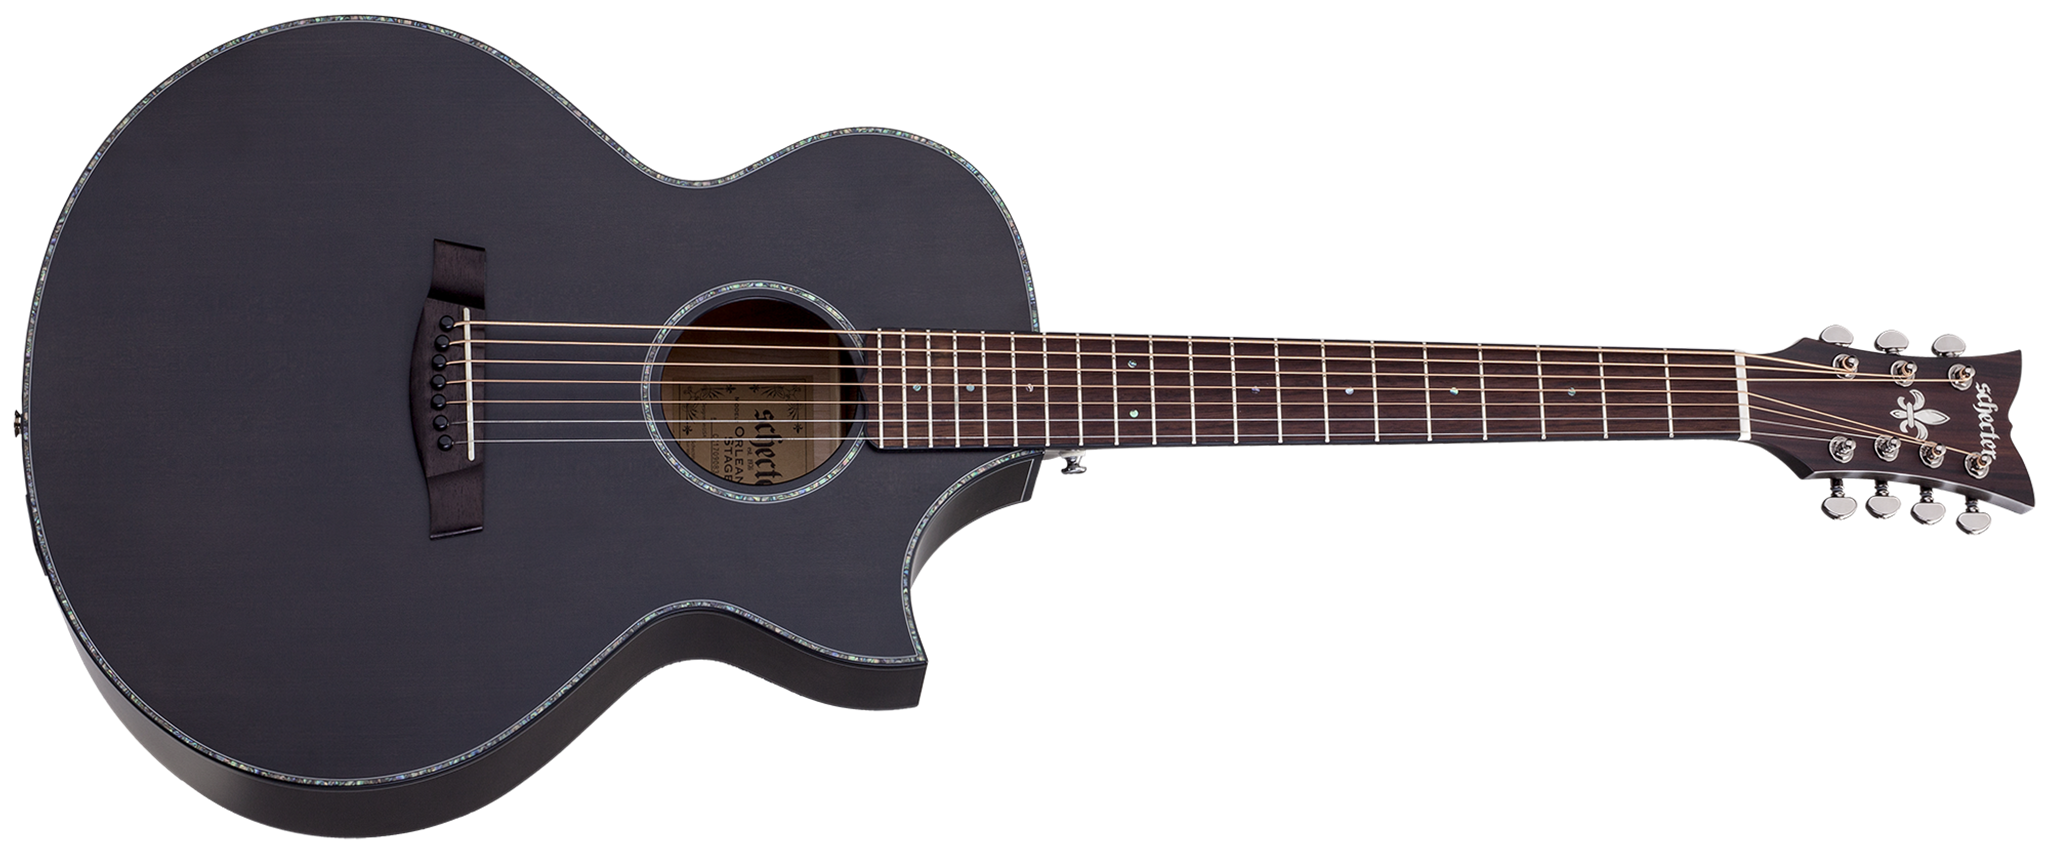 famlende spole Syd Schecter DIAMOND SERIES Orleans Stage-7 Satin See Thru Black 7-String  Acoustic Electric Guitar